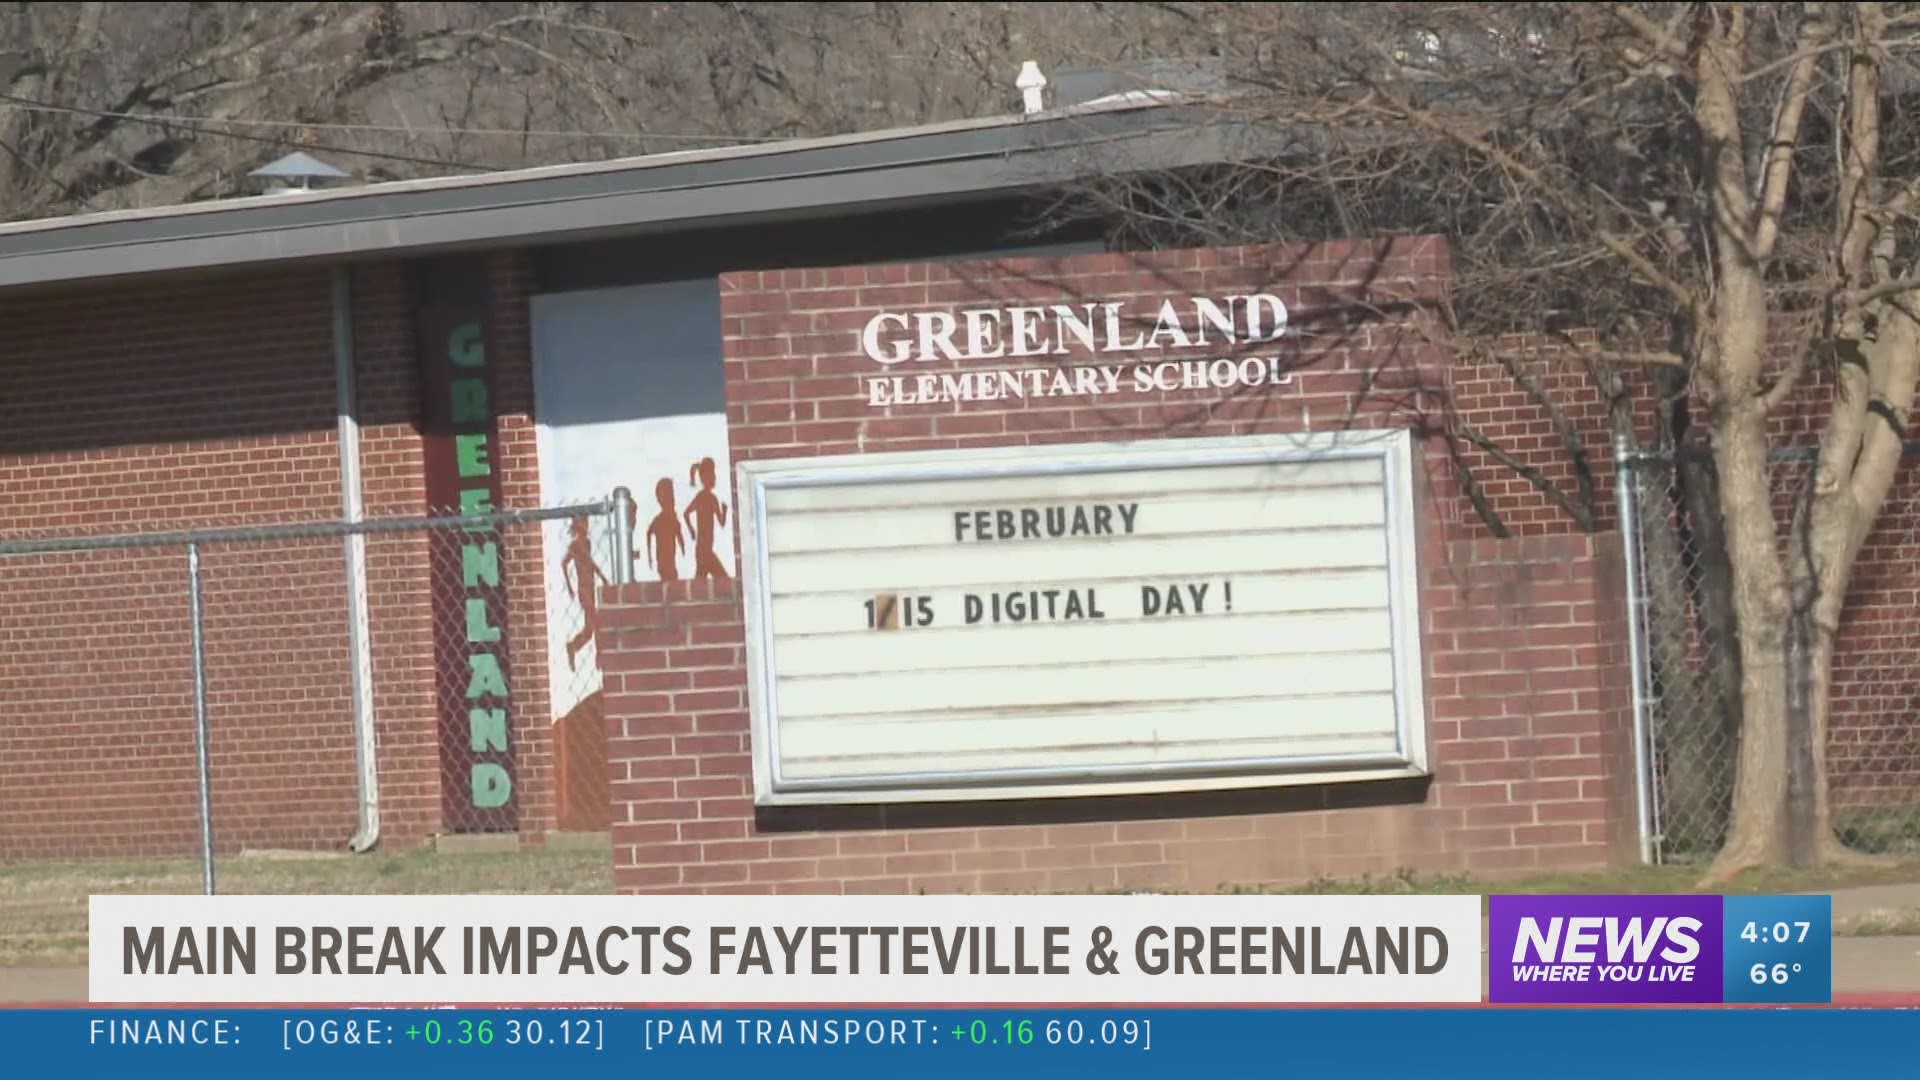 Water was shut off for four hours this morning due to a line break near Drake Field Airport. Greenland Schools switched to virtual learning due to loss of water.